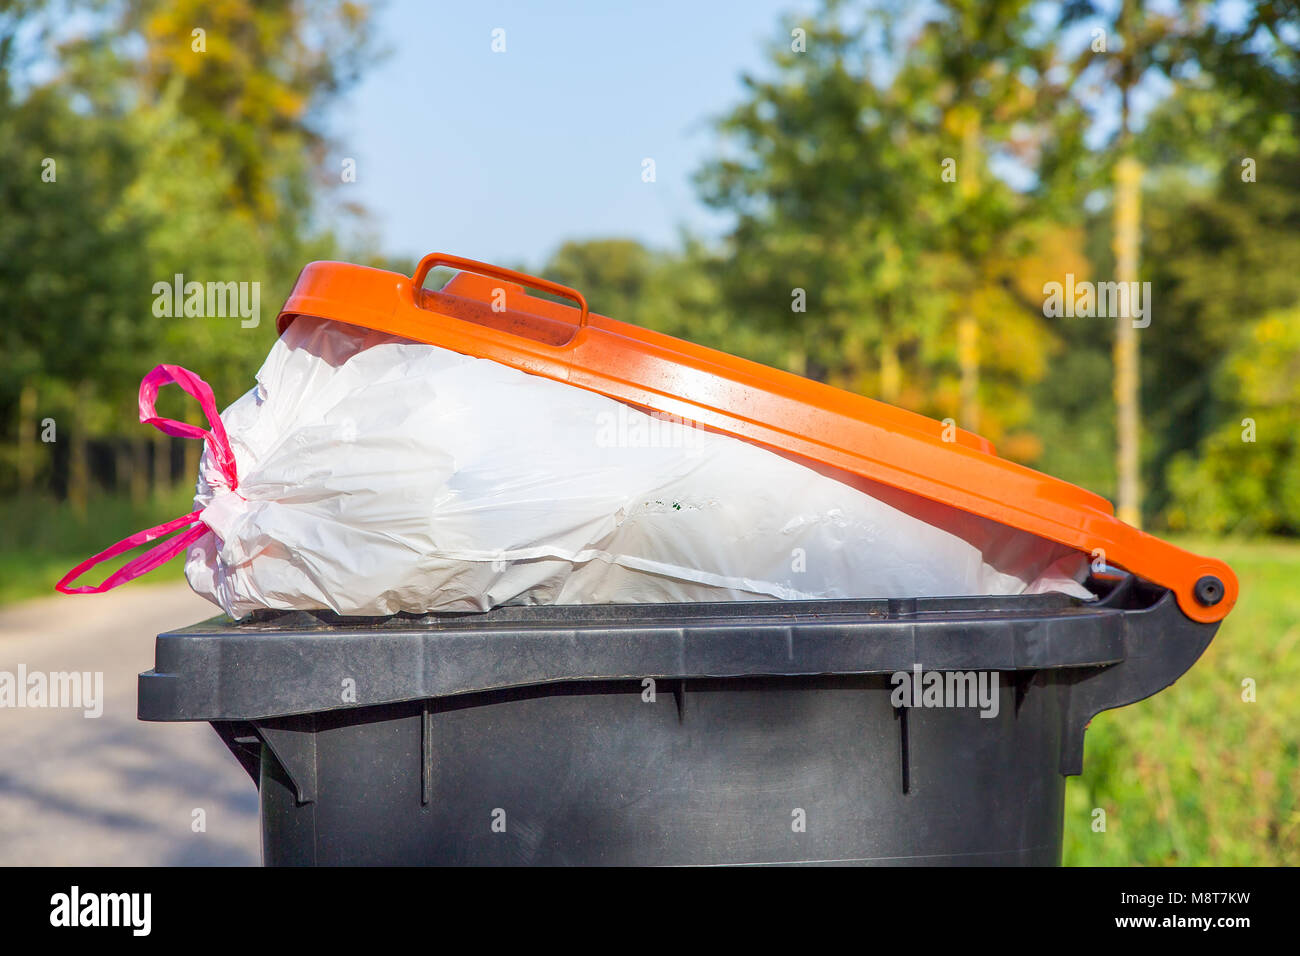 Trash can filled with garbage along street in nature Stock Photo